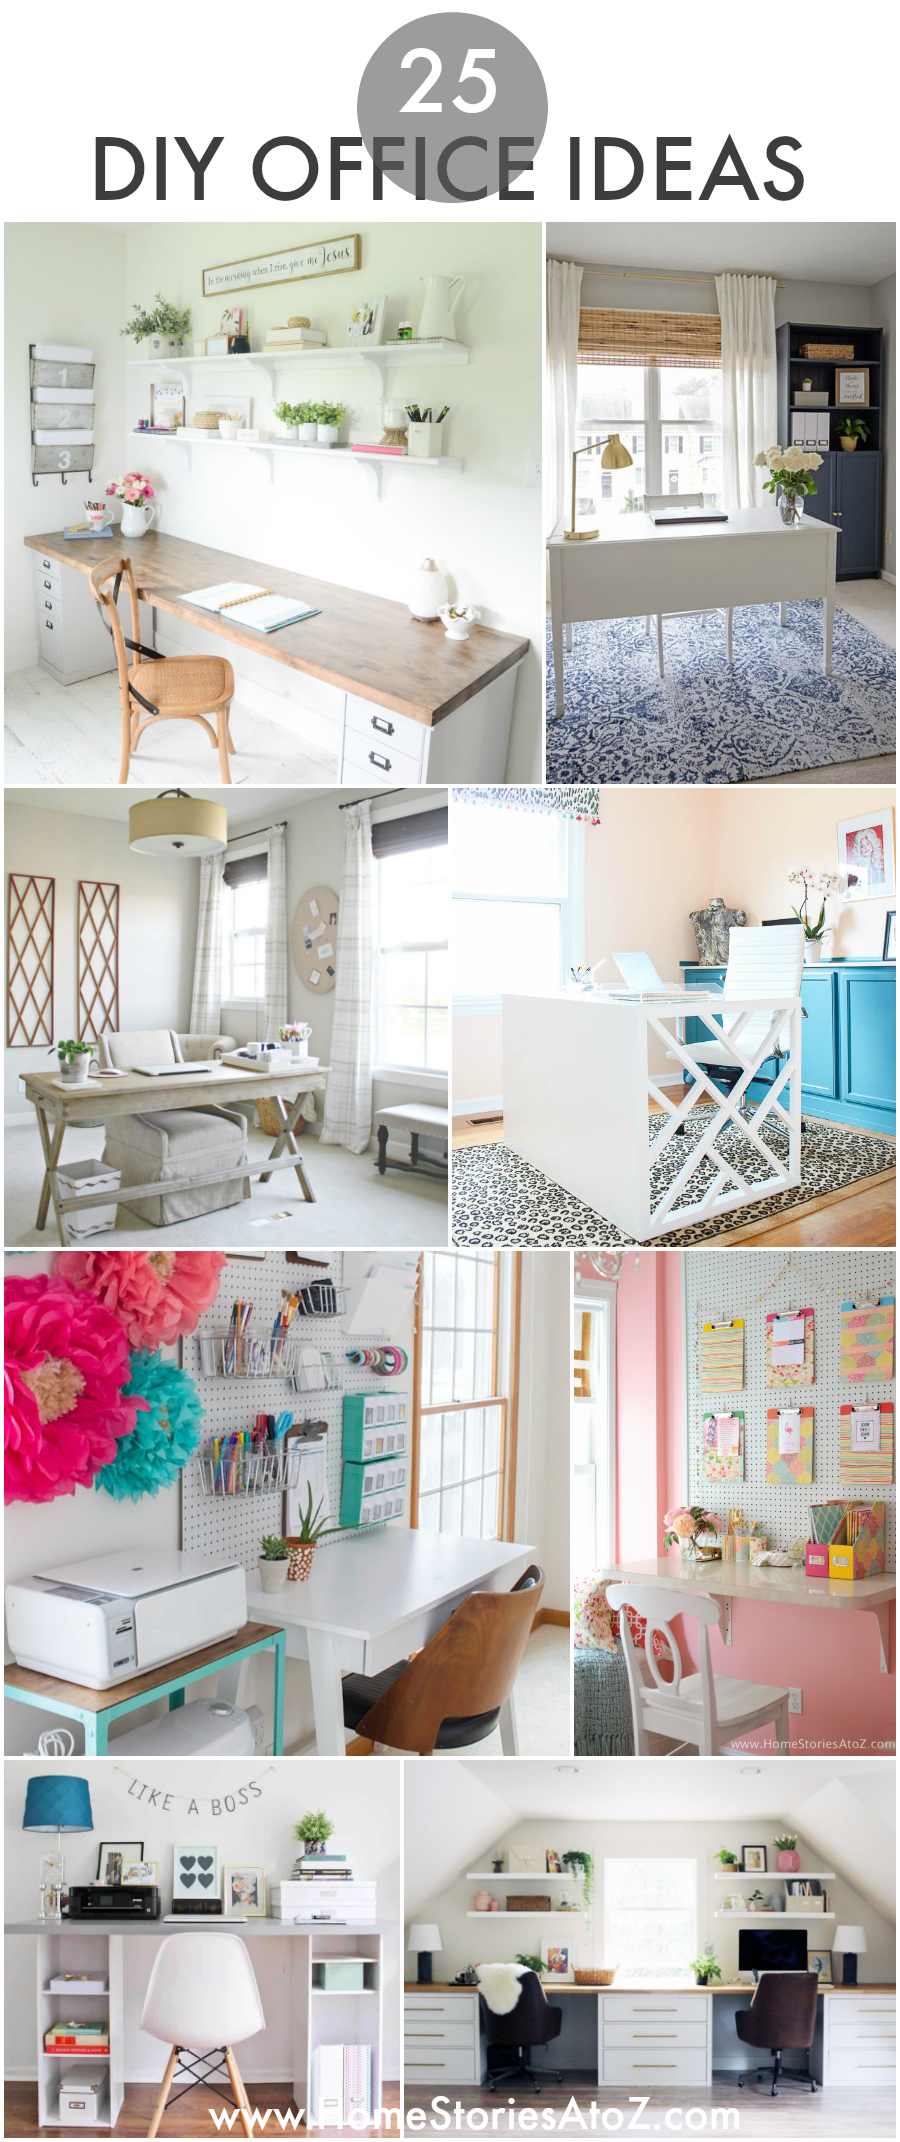 DIY Office Spaces: Tips for DIY Desk Ideas, Organization, and